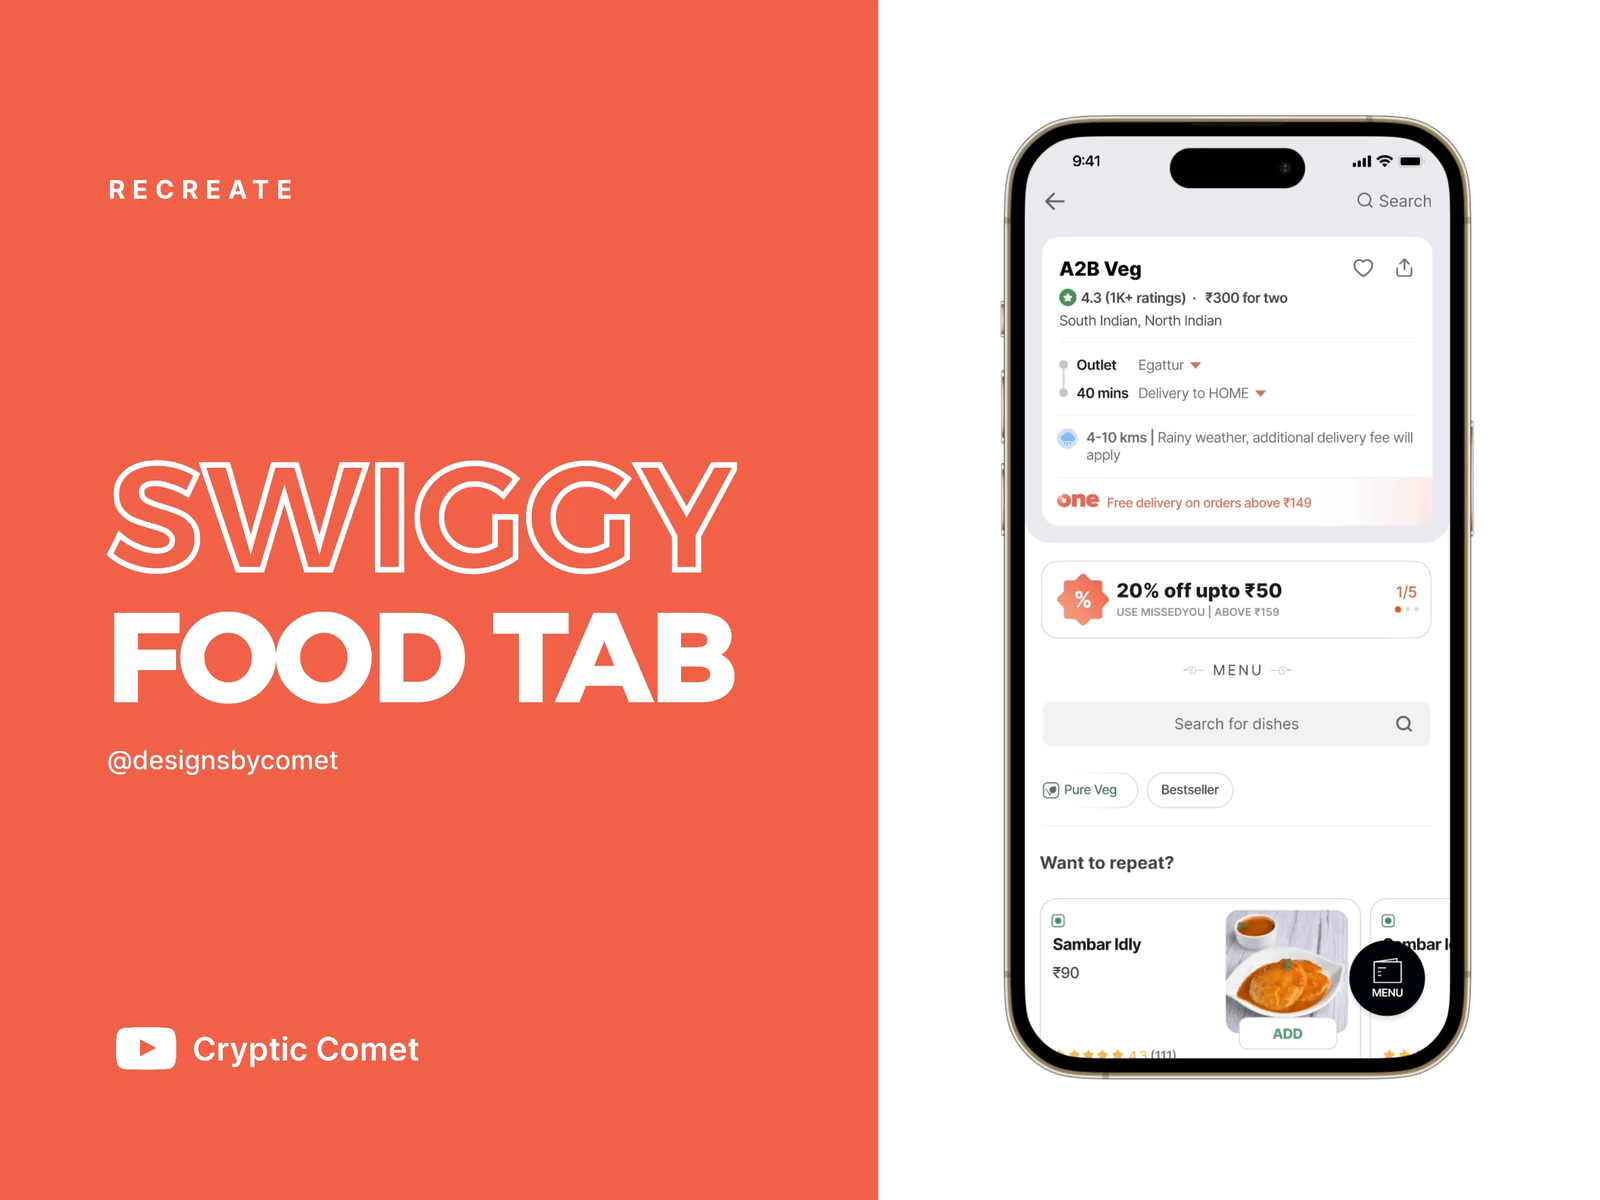 Swiggy Food Tab has 2 Search Buttons? app beautiful ui design food delivery app mobile app design search options swiggy trending ux ui ux